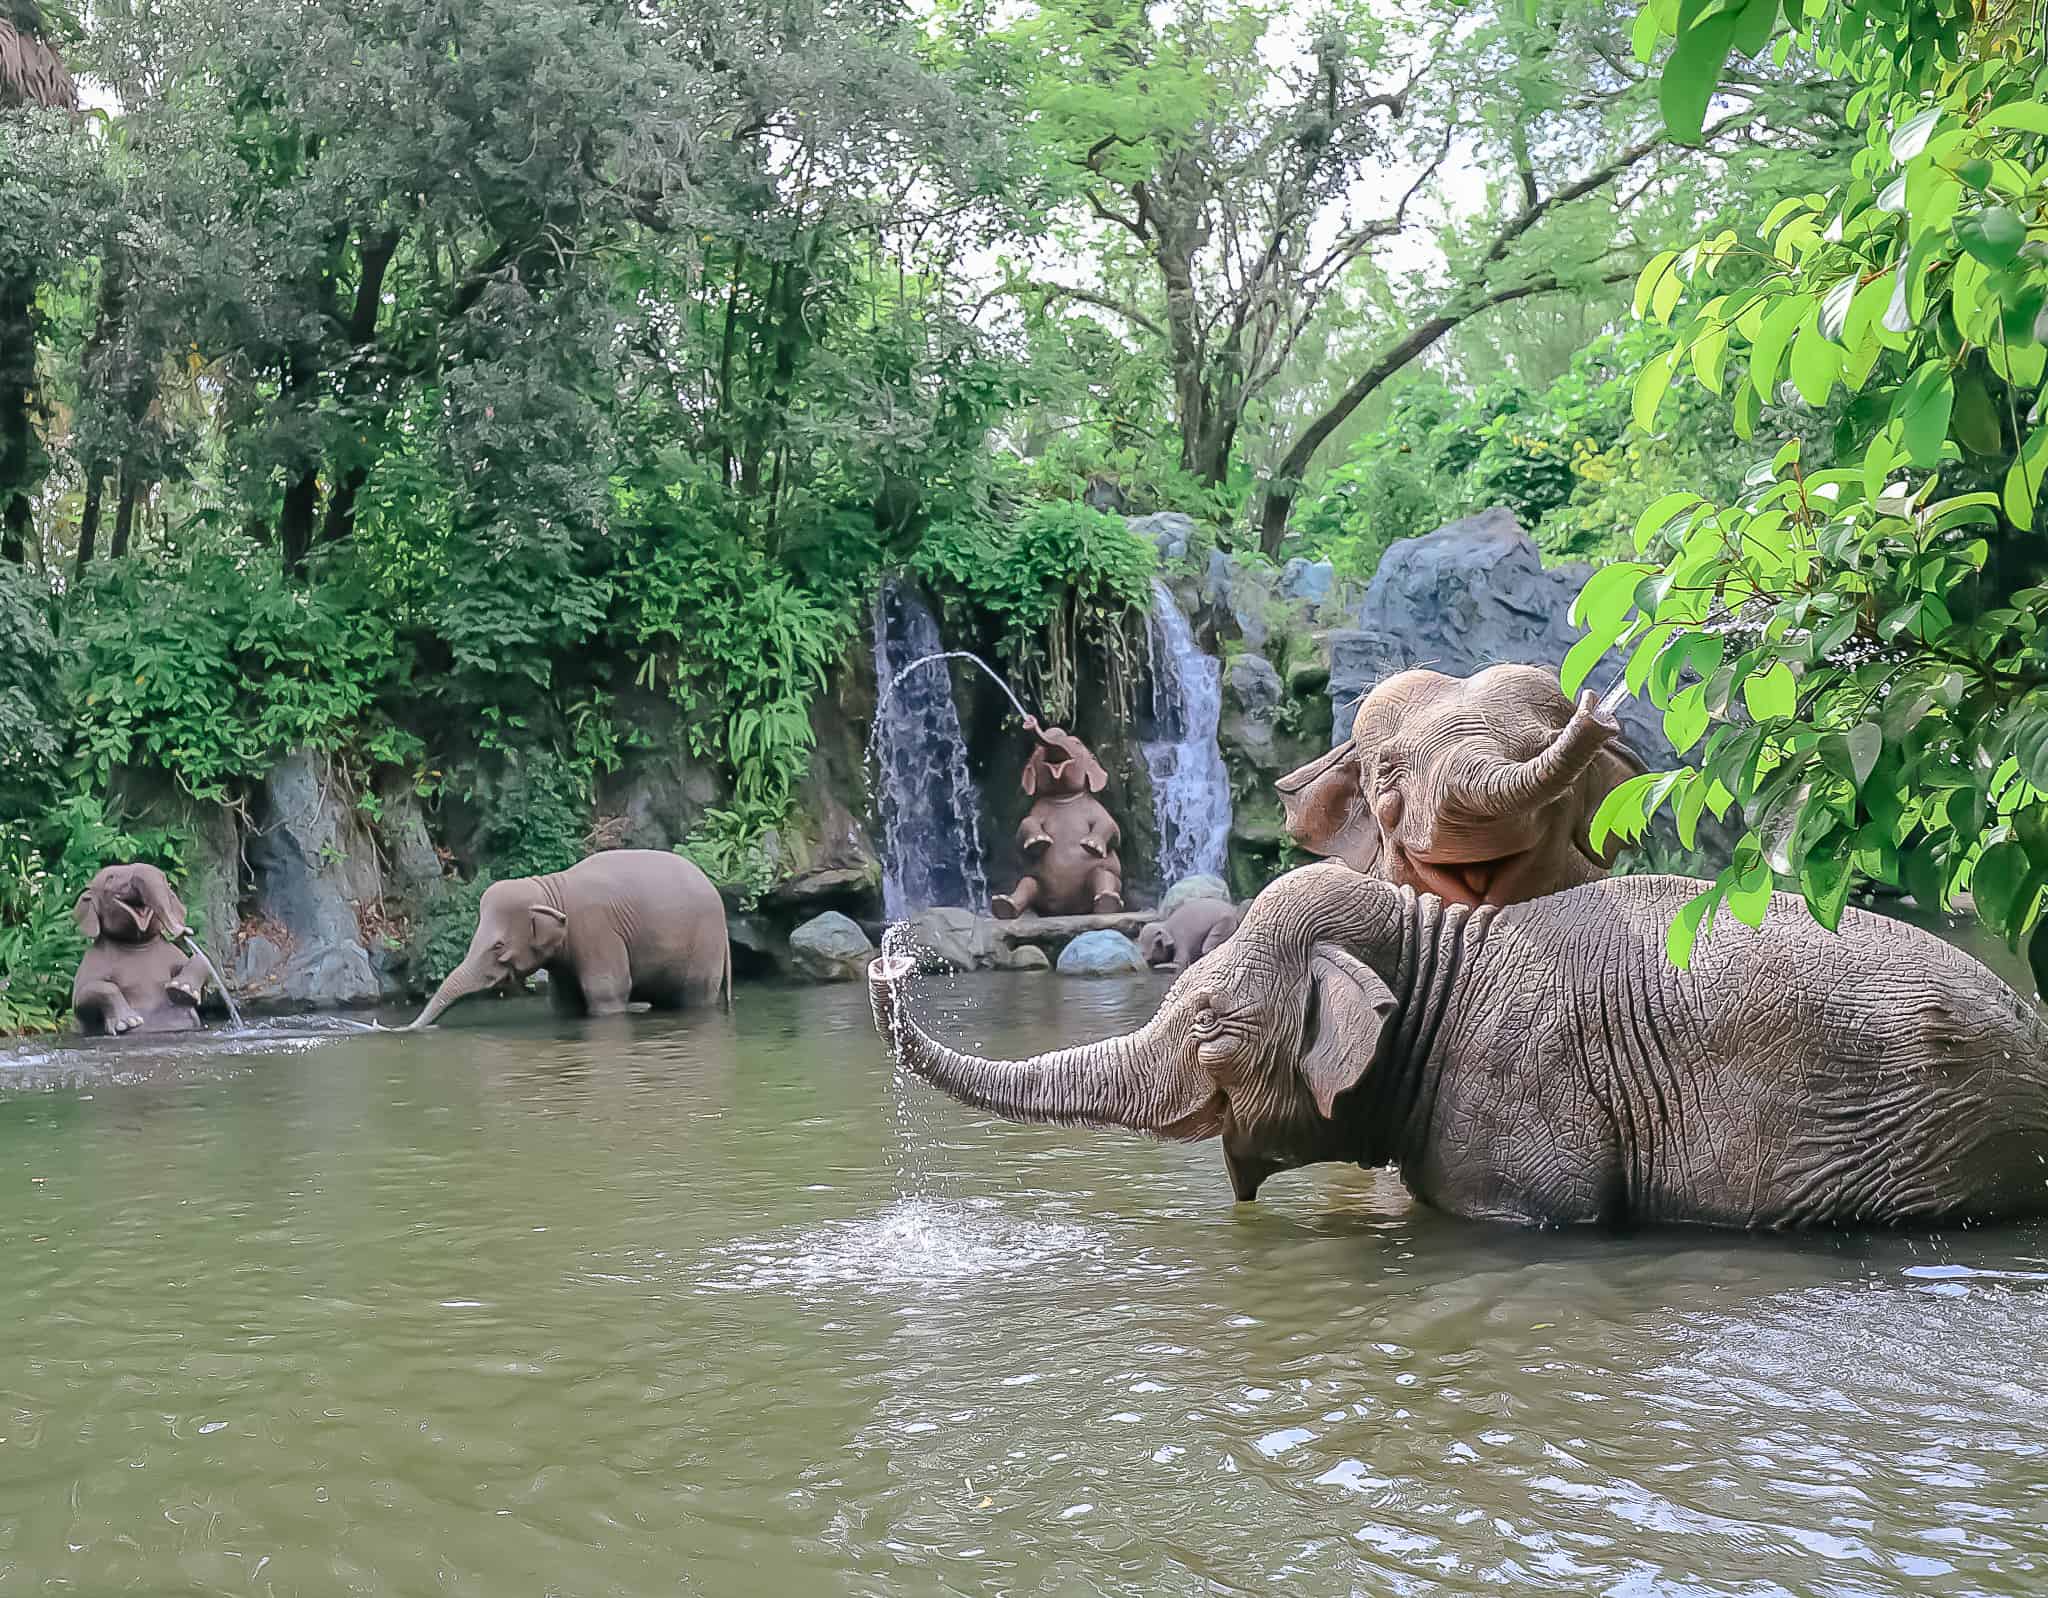 several elephants playing in the water 